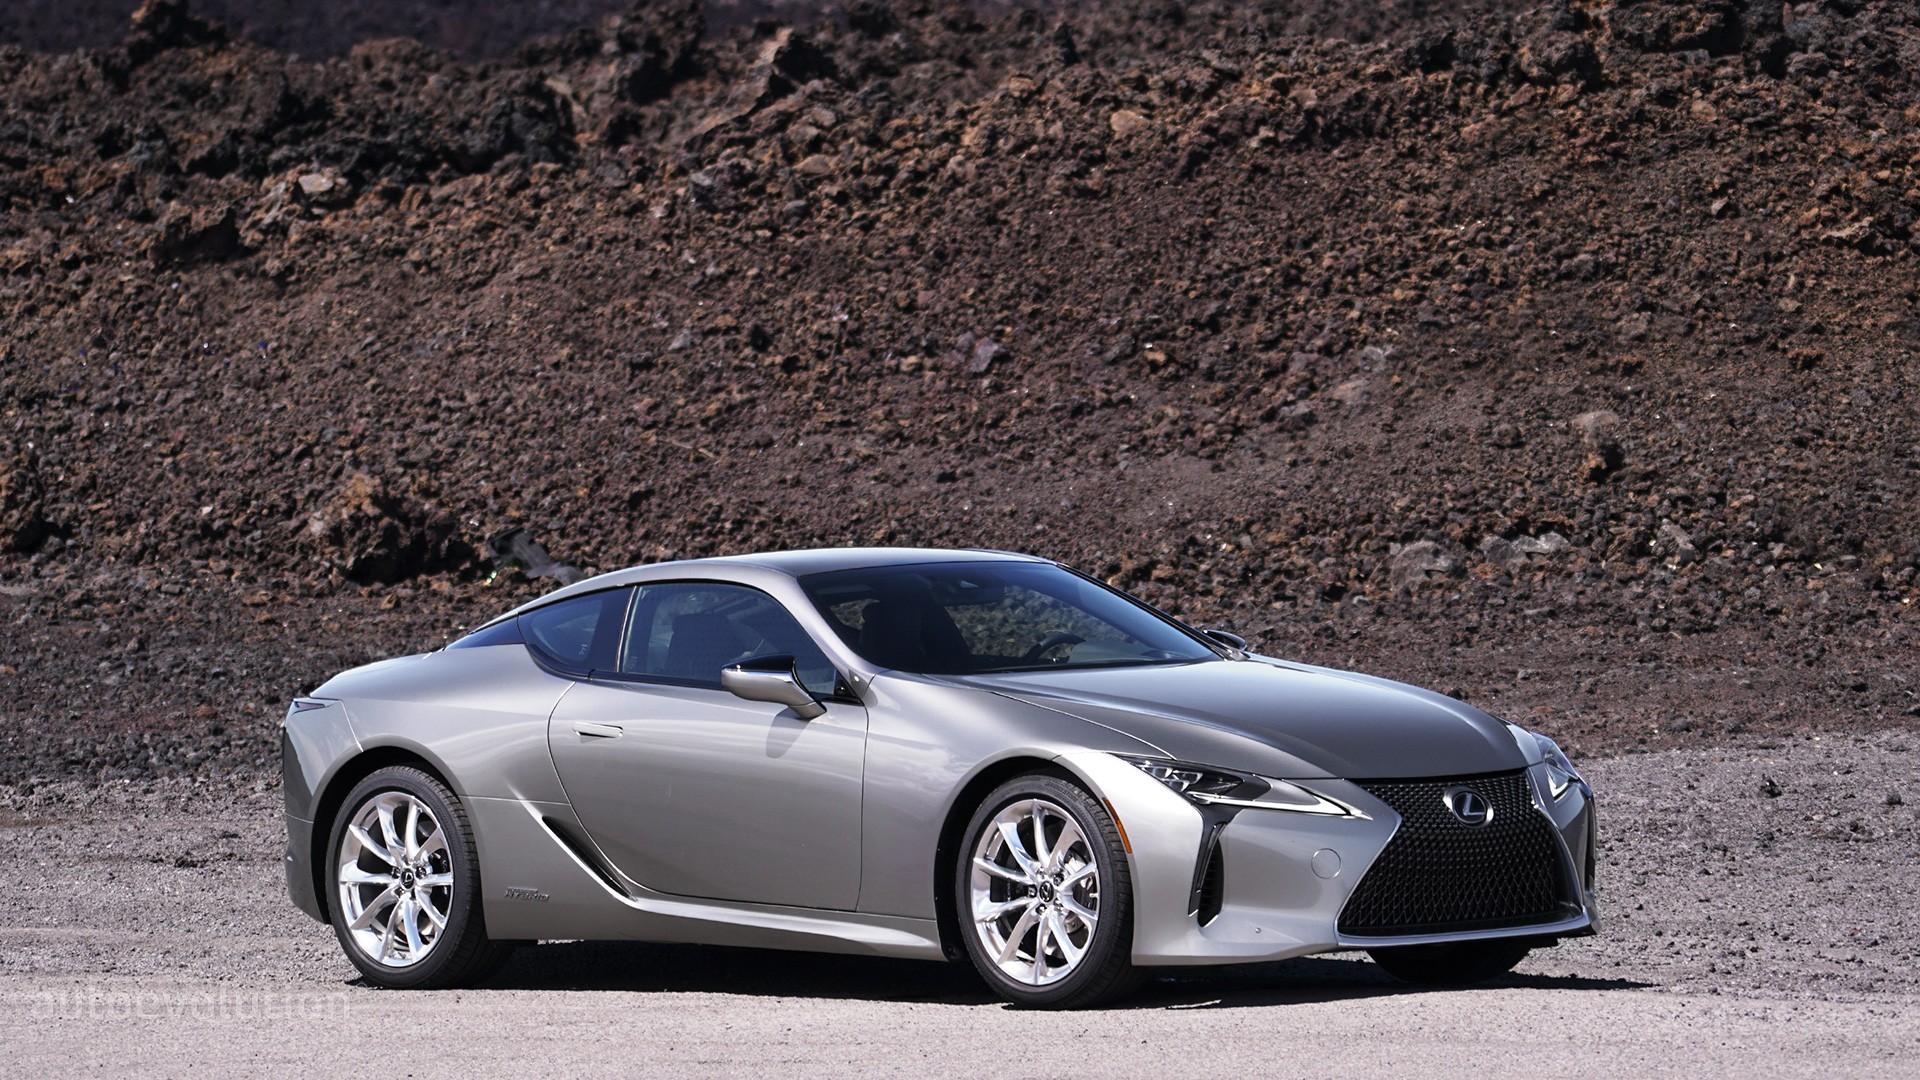 New Lexus LC F Coupe Rumor: 630 HP 4.0L V8 and CFRP